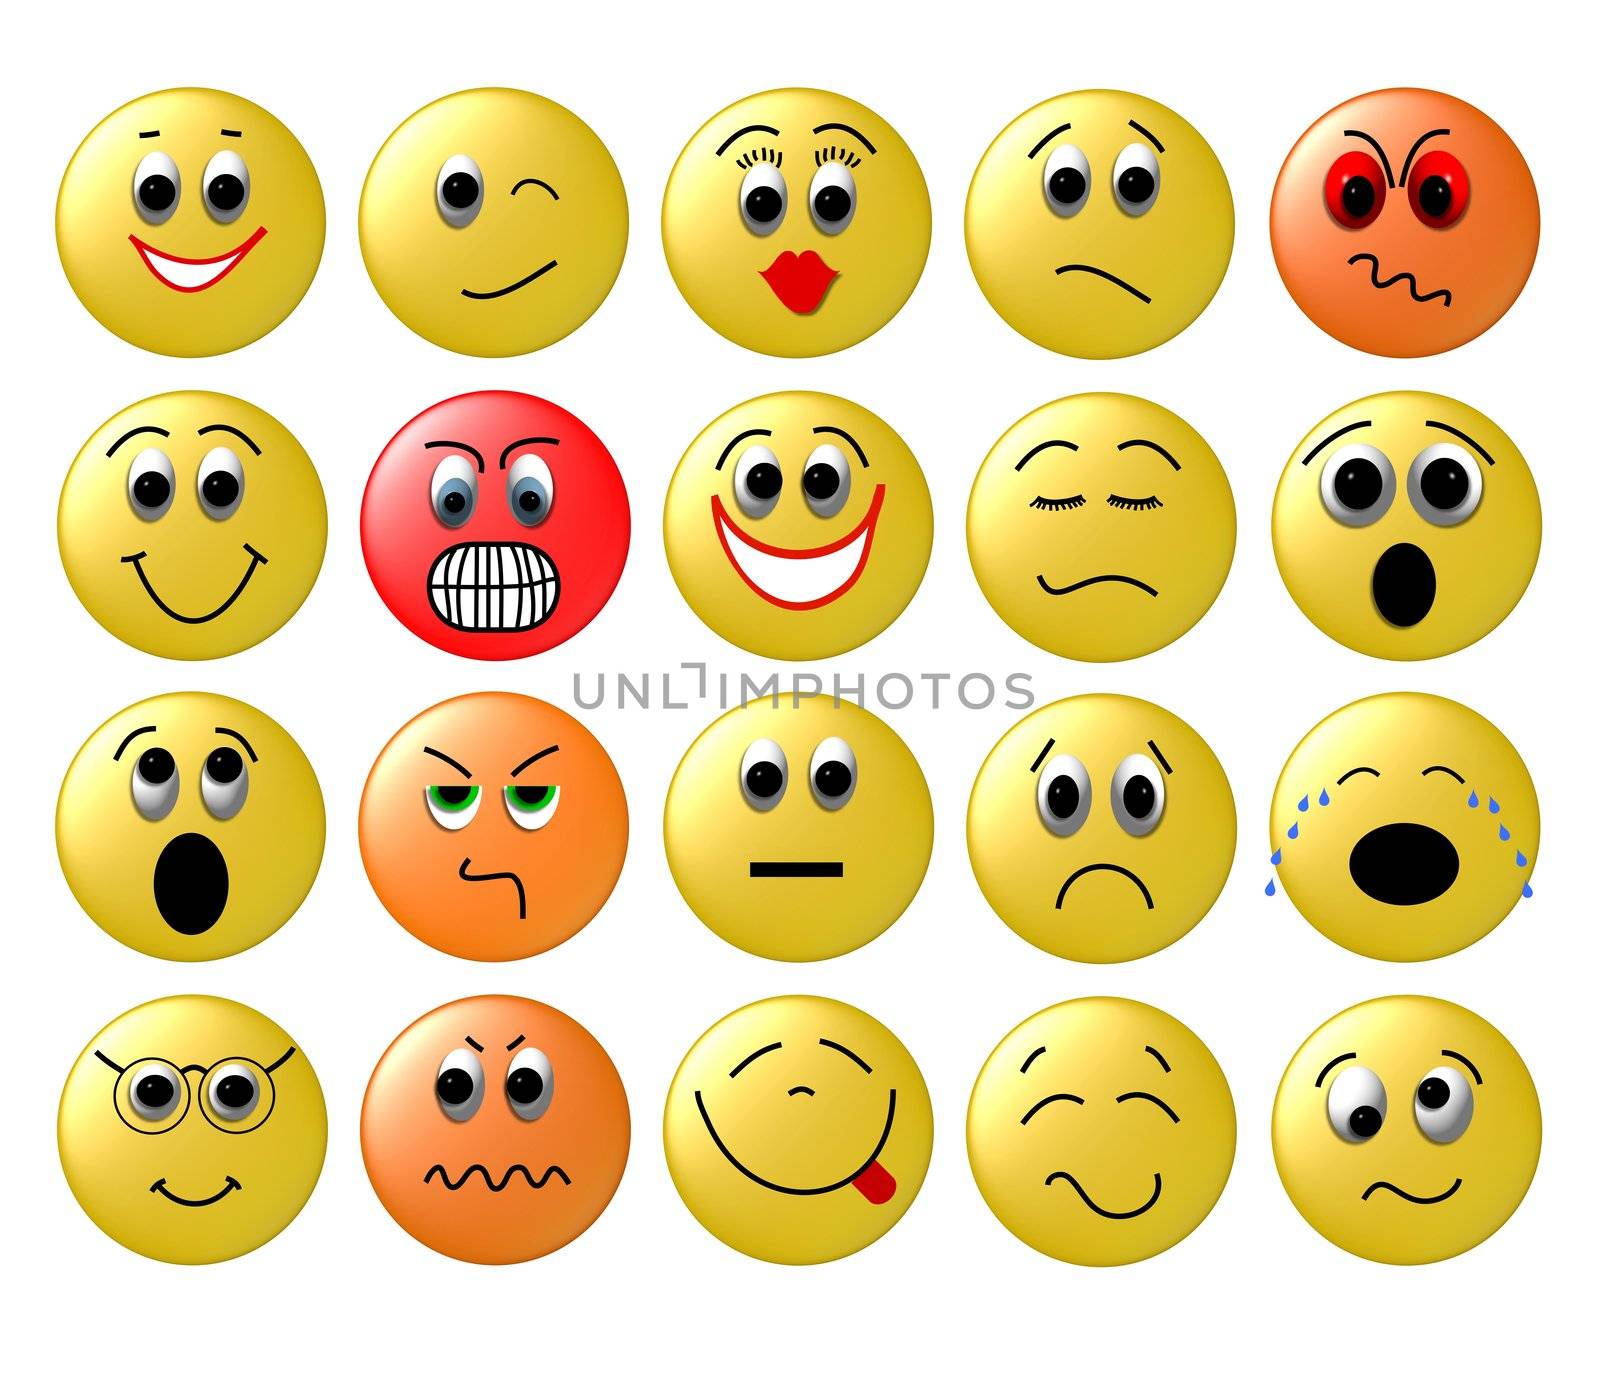 smileys different emotions by peromarketing